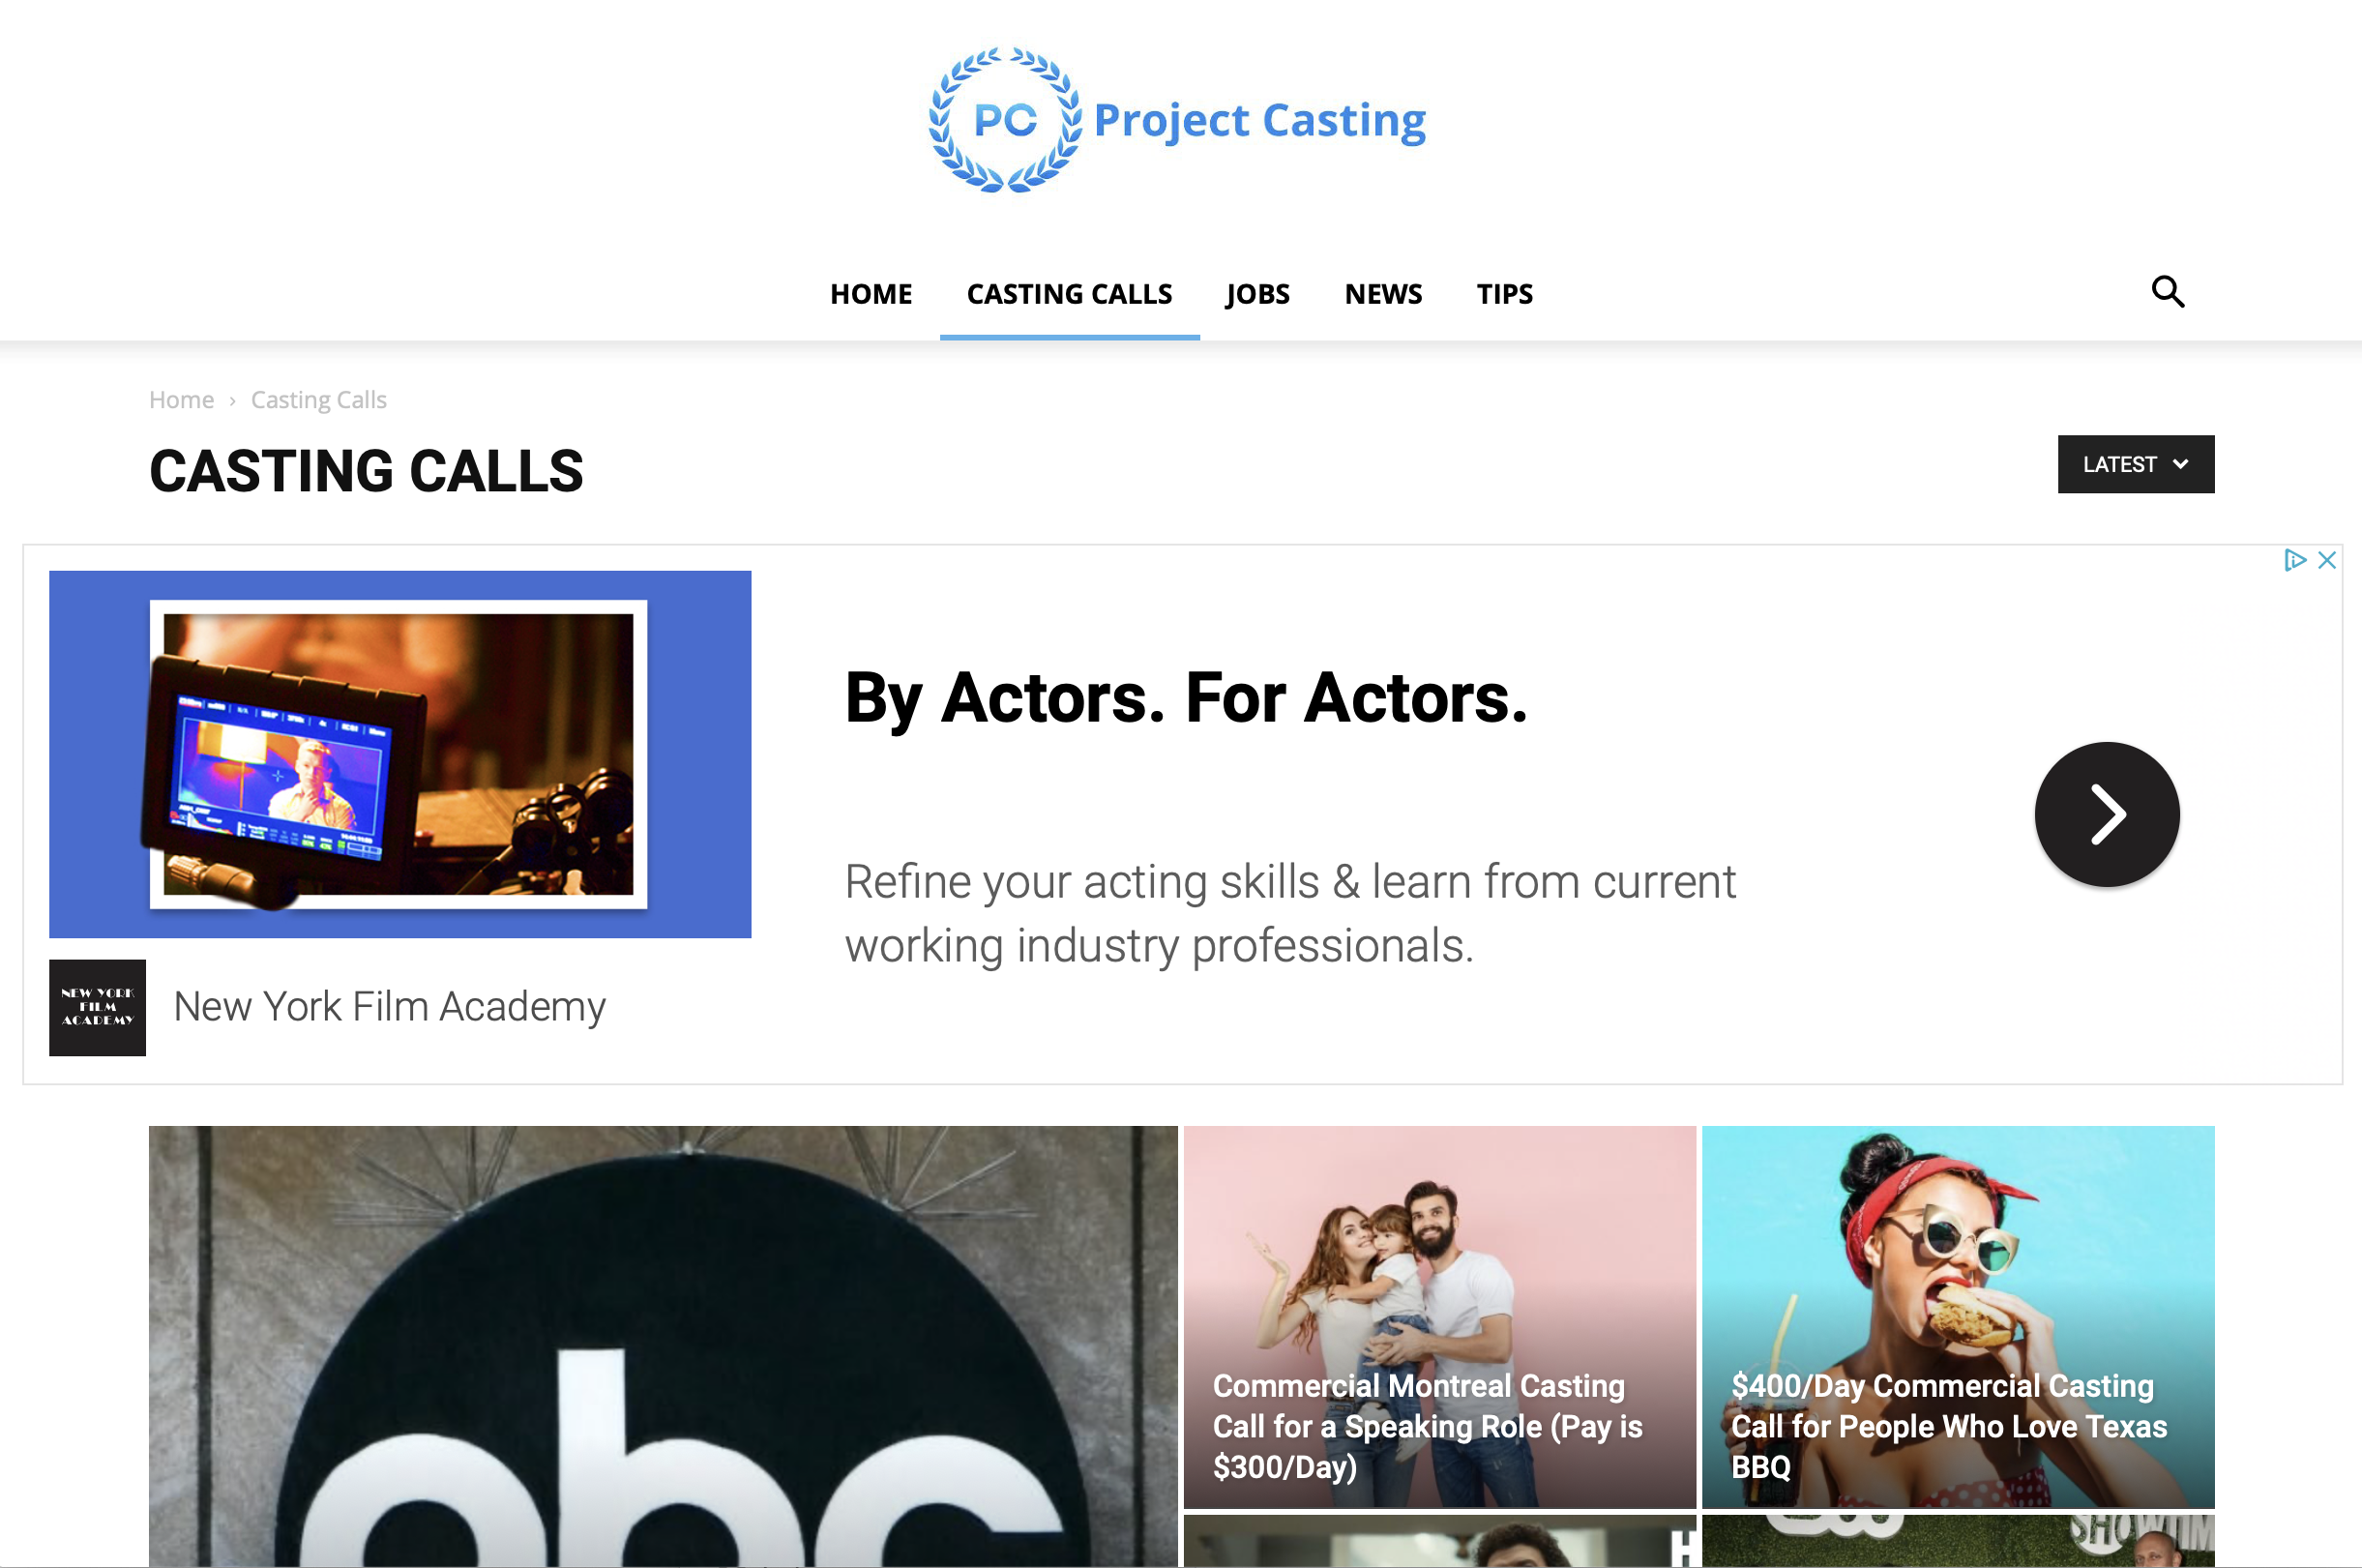 Find online auditions for actors - totally free!